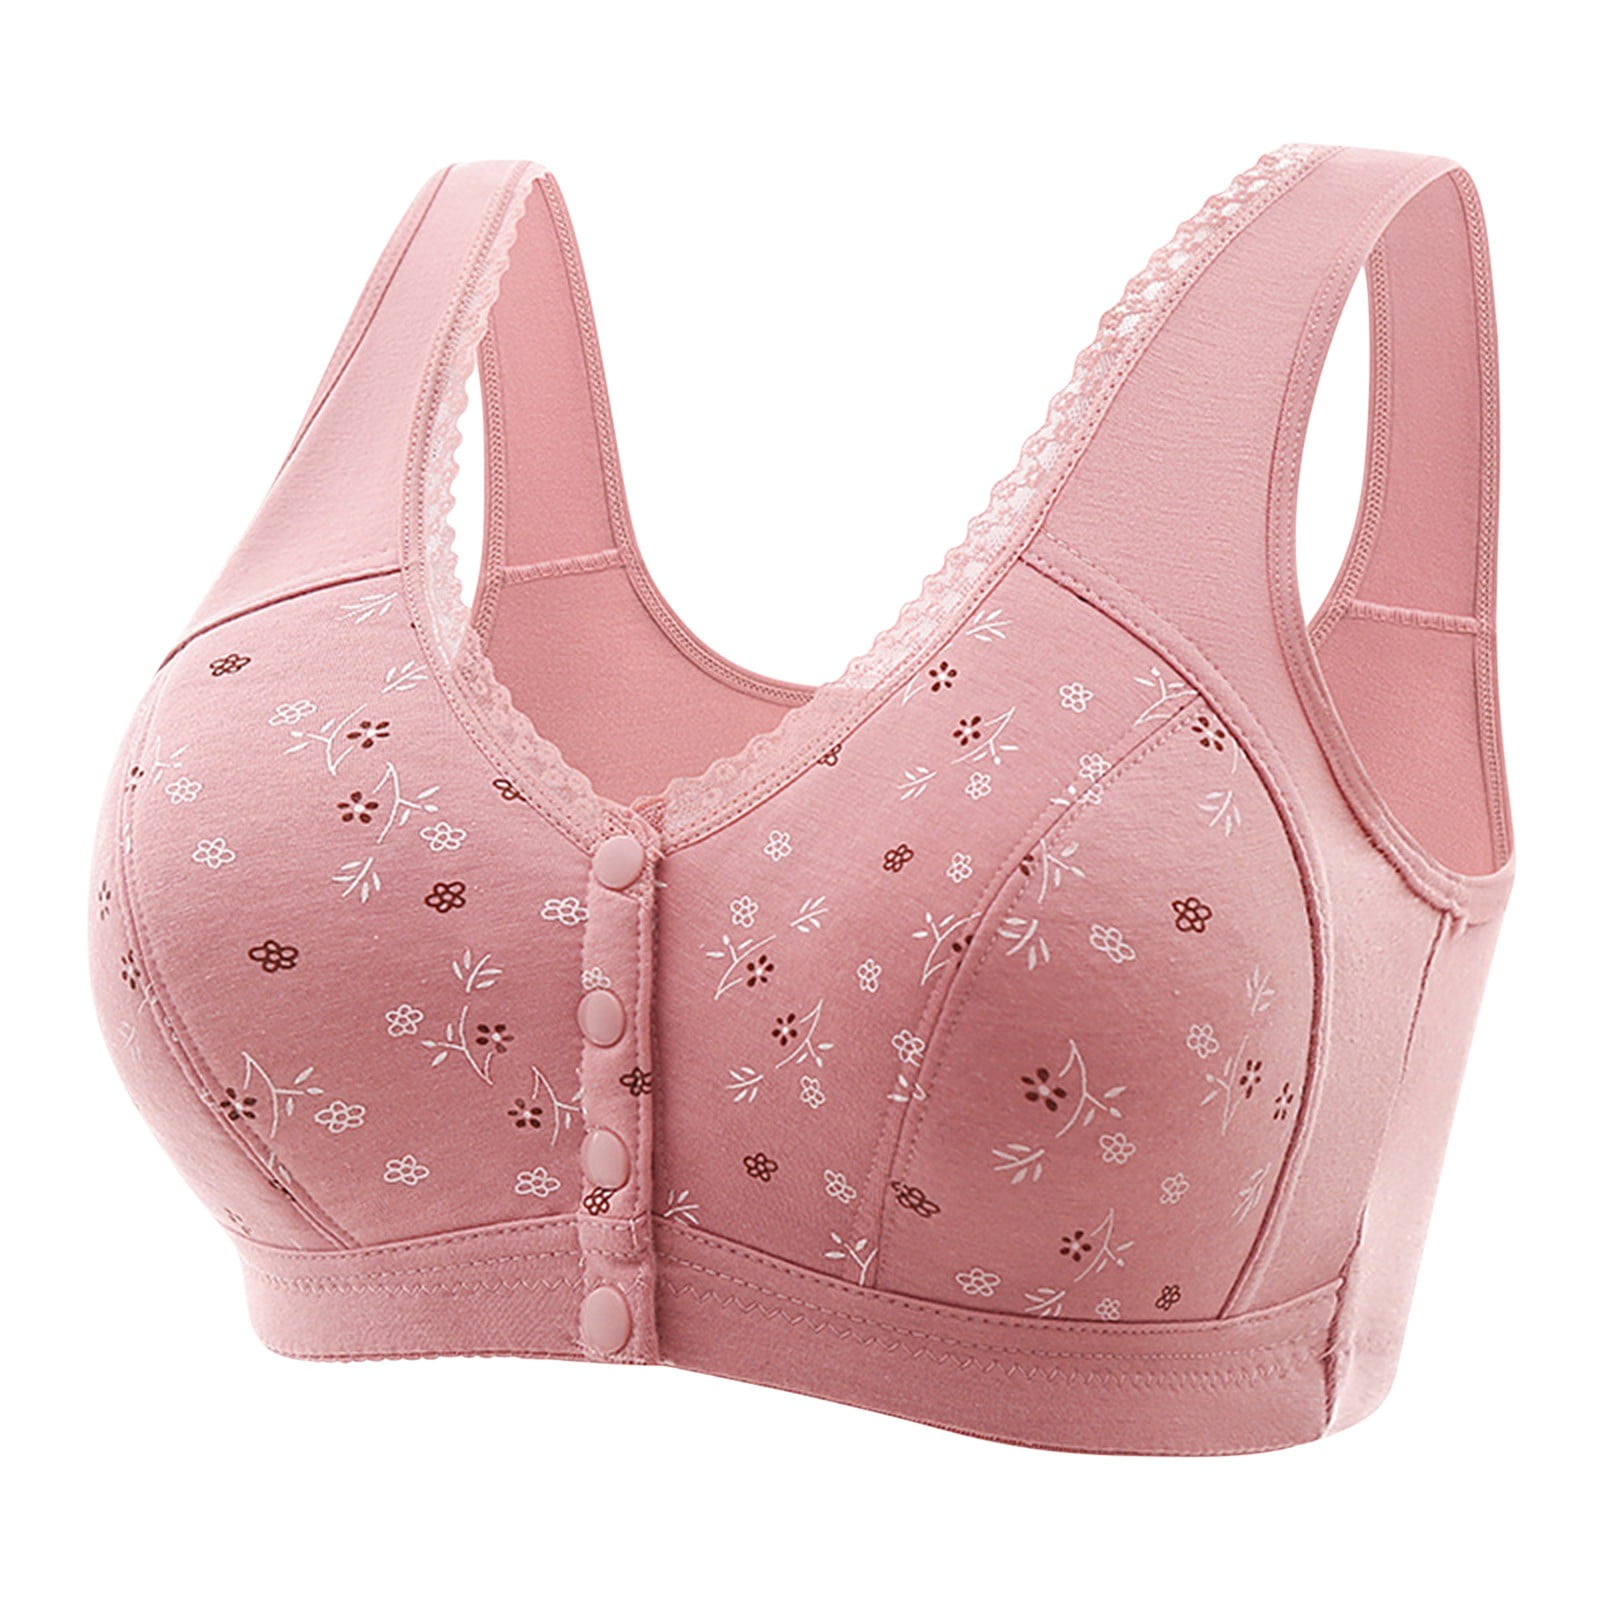 Orders Placed Recently Comfortable Daisy Bra for Qatar